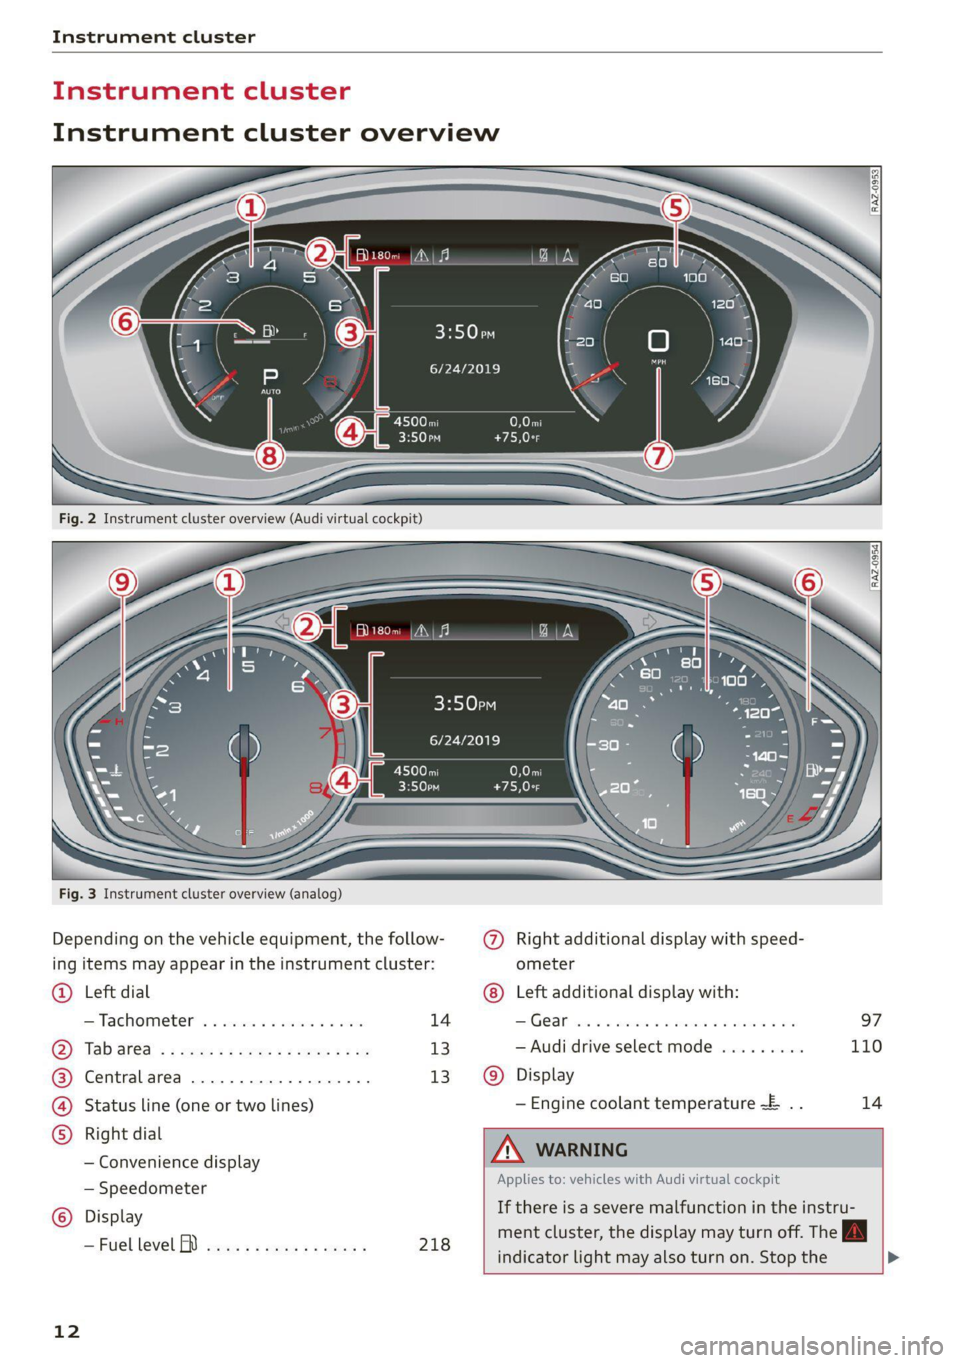 AUDI A4 2021  Owner´s Manual Instrument cluster 
trument clu     
Instrument cluster overview 
Belo 
6/24/2019 
6/24/2019 
C100 T 
  
Fig. 3 Instrument cluster overview (analog) 
      
  
  
  
  
Depending on the vehicle equipm